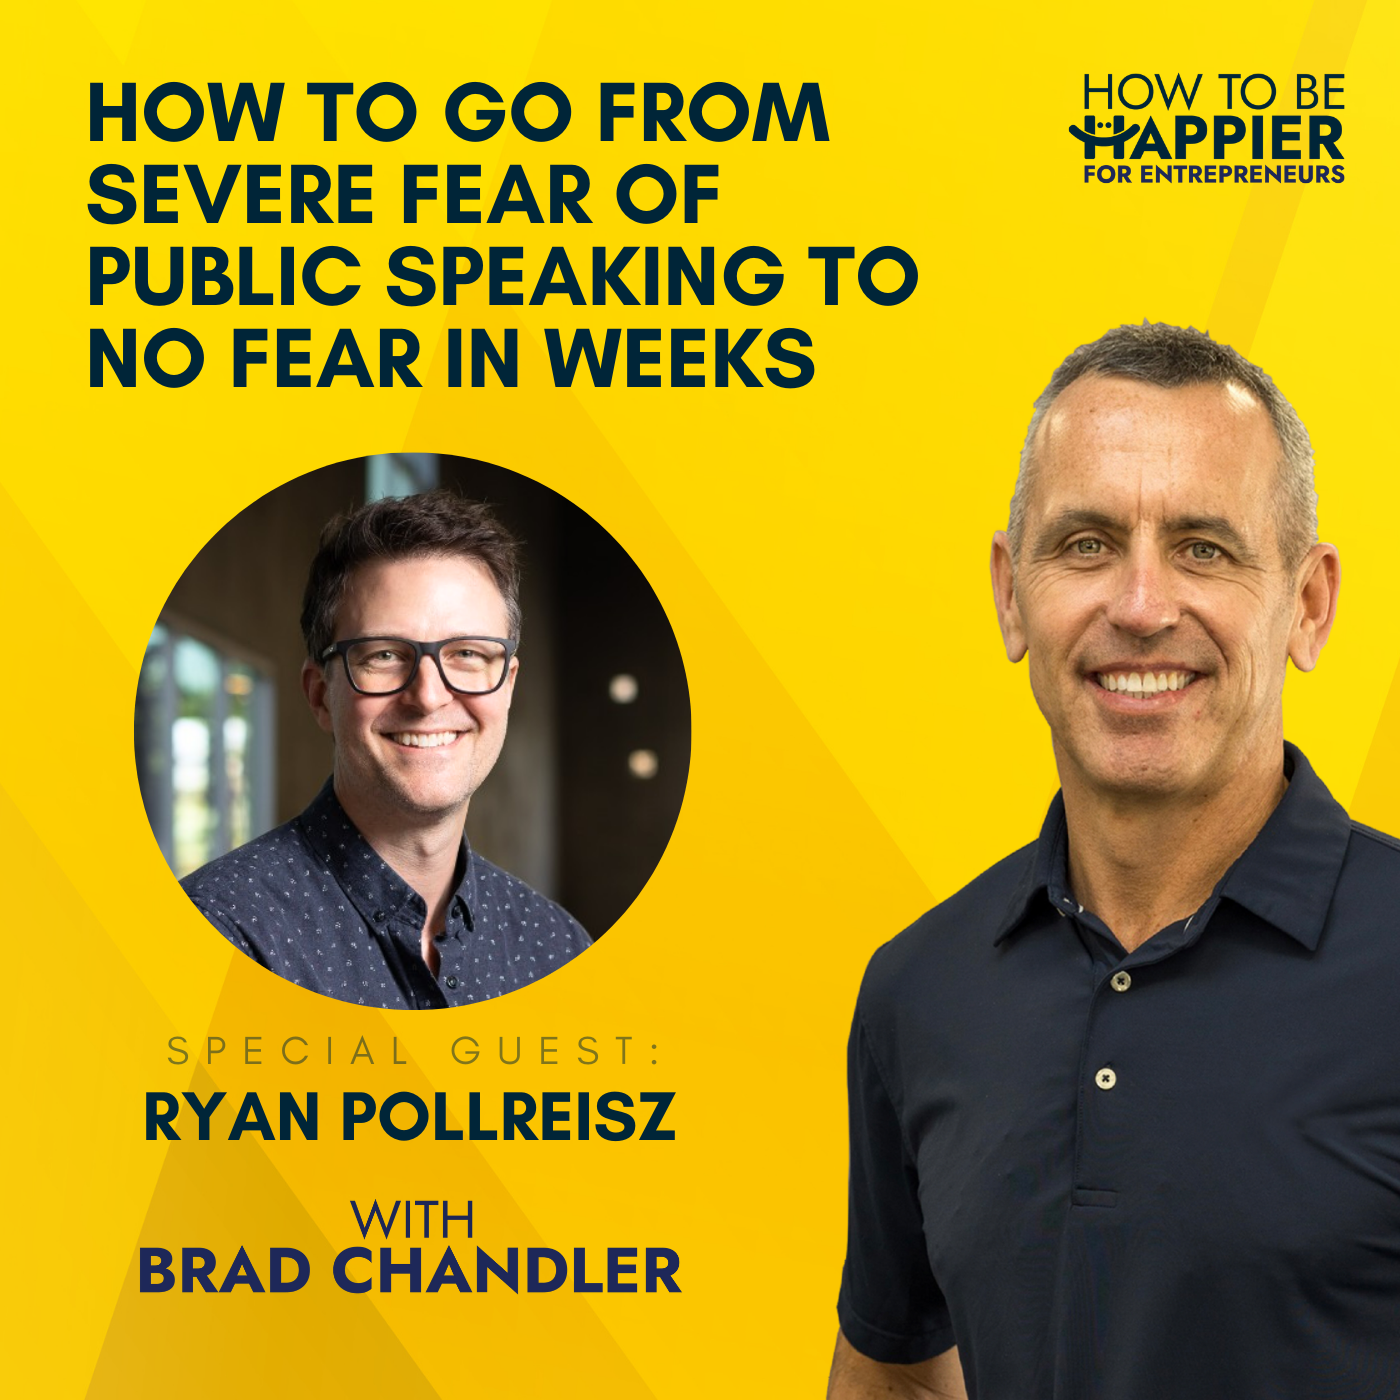 EP25: How to Go From Severe Fear of Public Speaking to No Fear in Weeks with Ryan Pollreisz